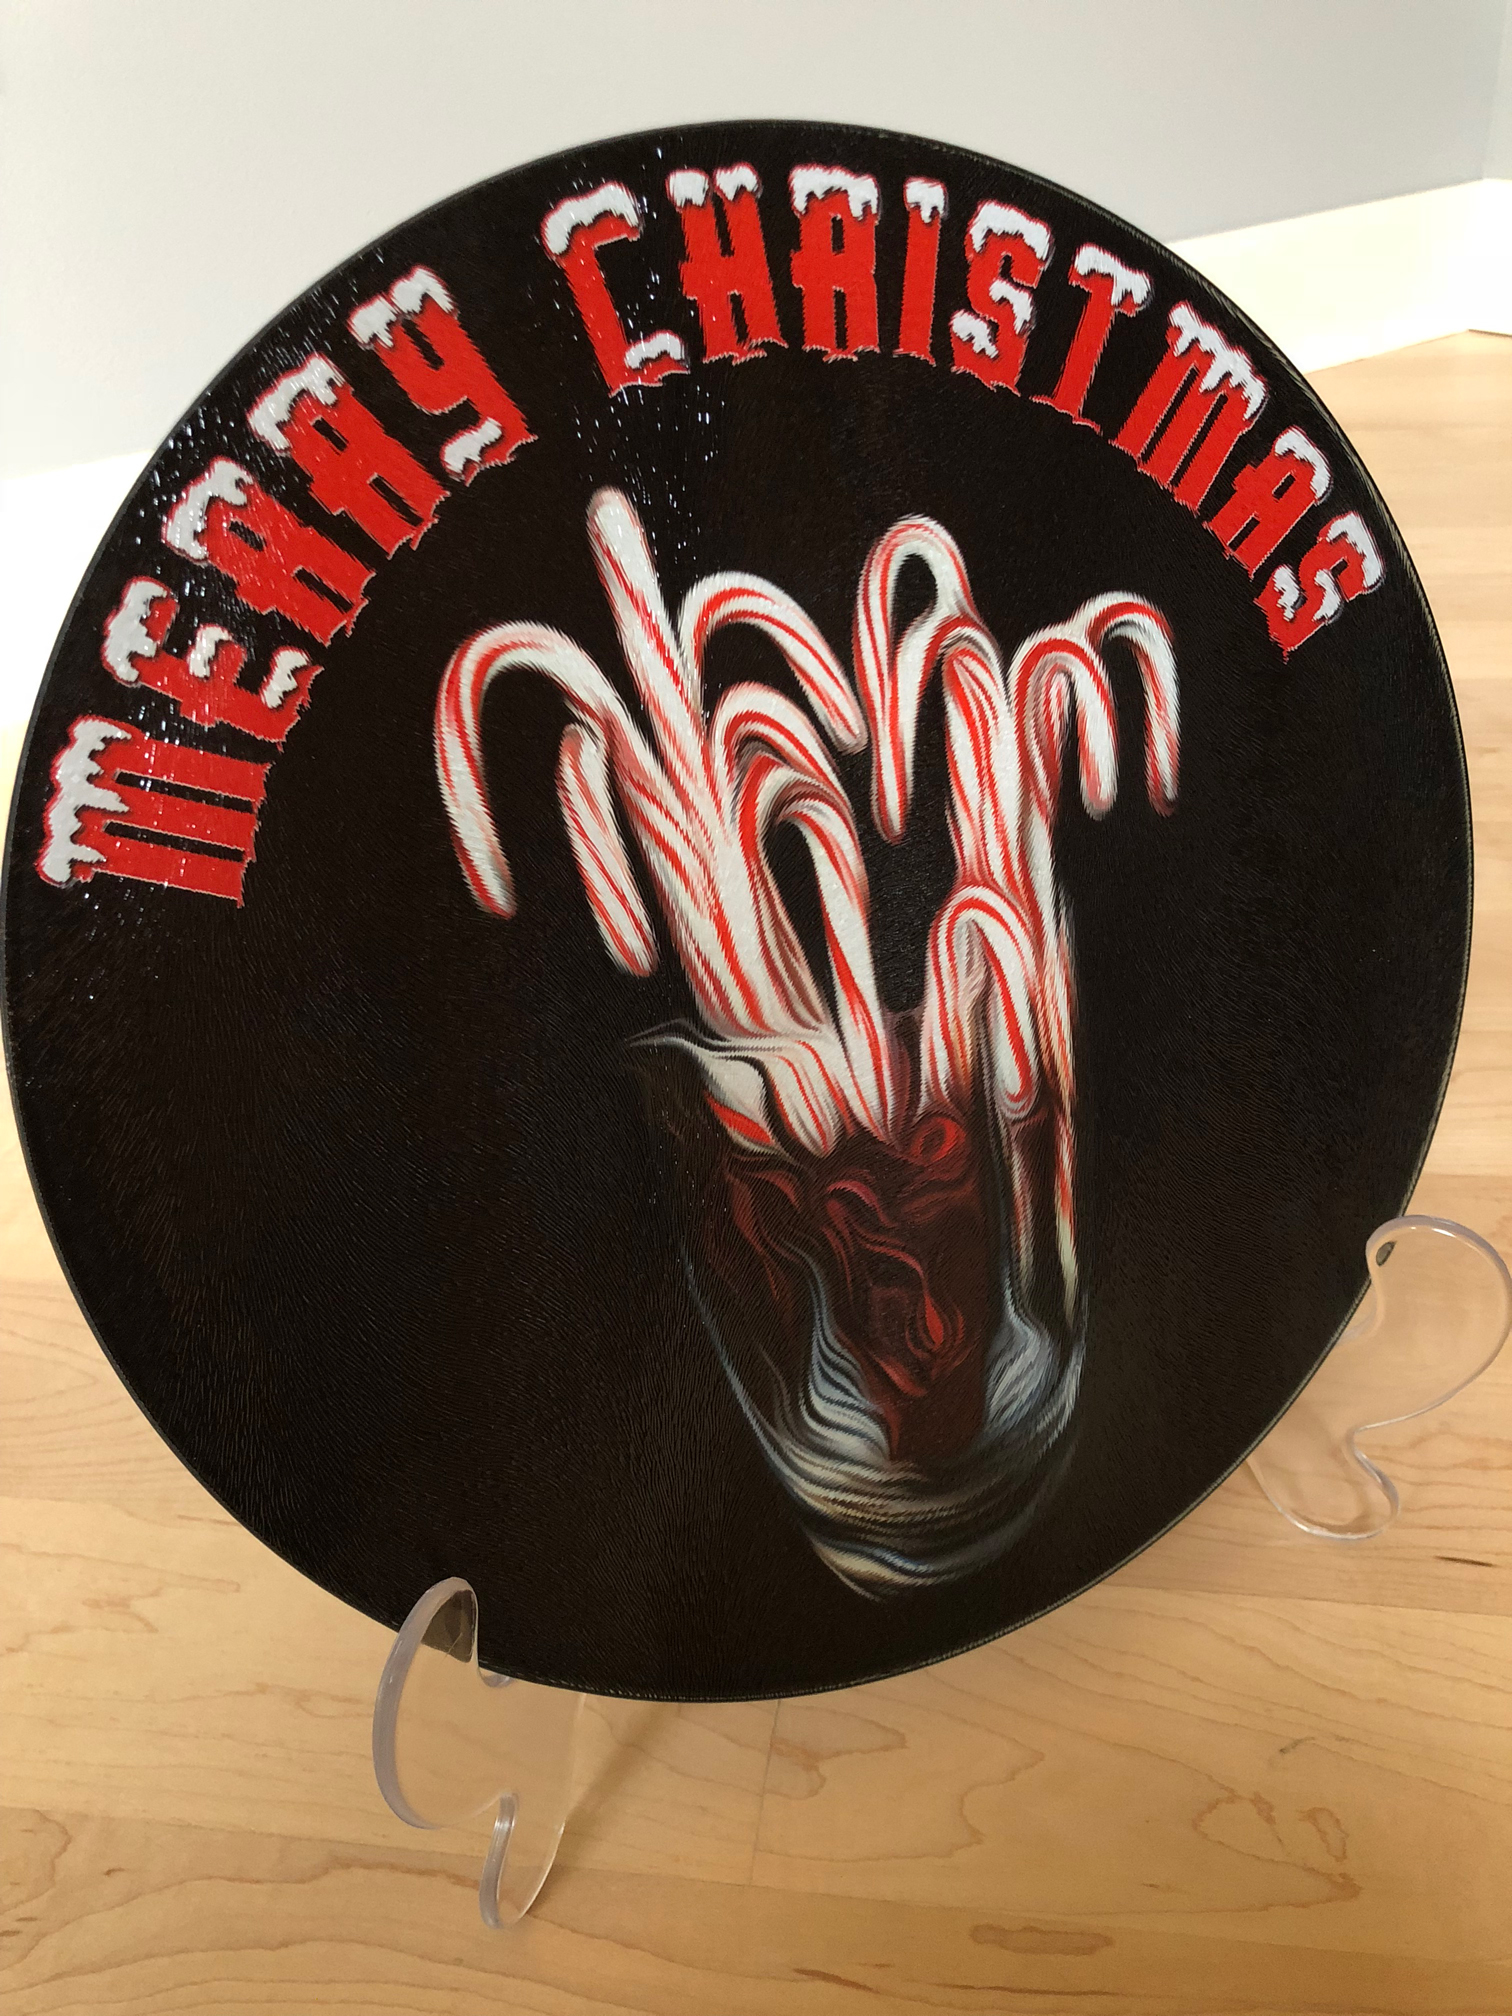 Holiday Cutting Board made with sublimation printing